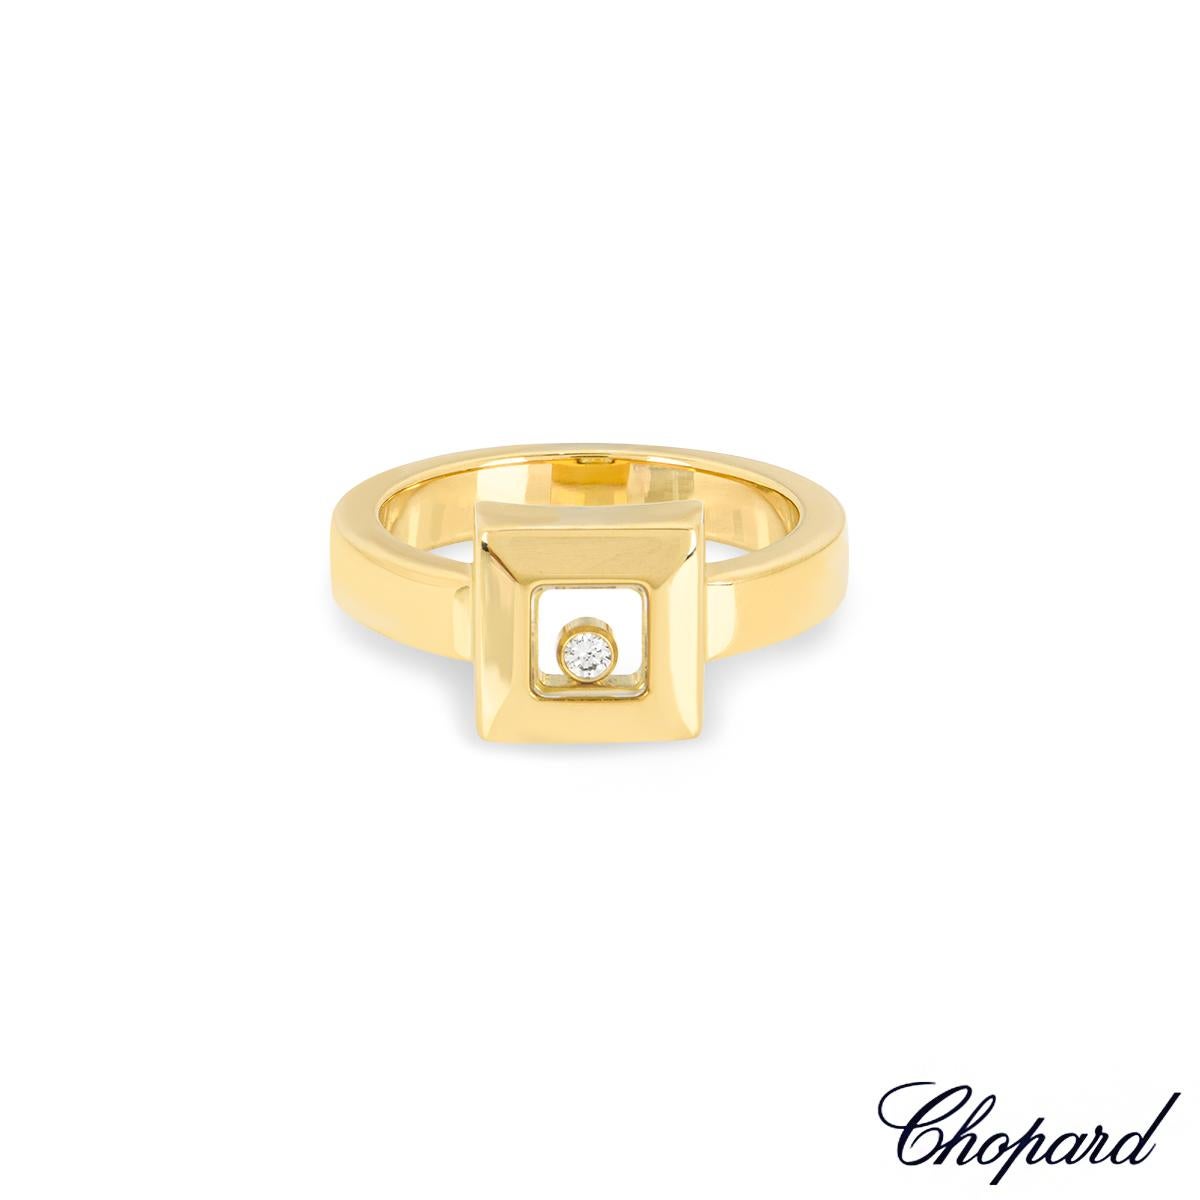 A stylish 18k yellow gold Chopard diamond ring from the Happy Diamonds collection. The ring features a square motif comprising of a floating round brilliant cut diamond set in between two iconic Chopard signed glass panels, with an approximate